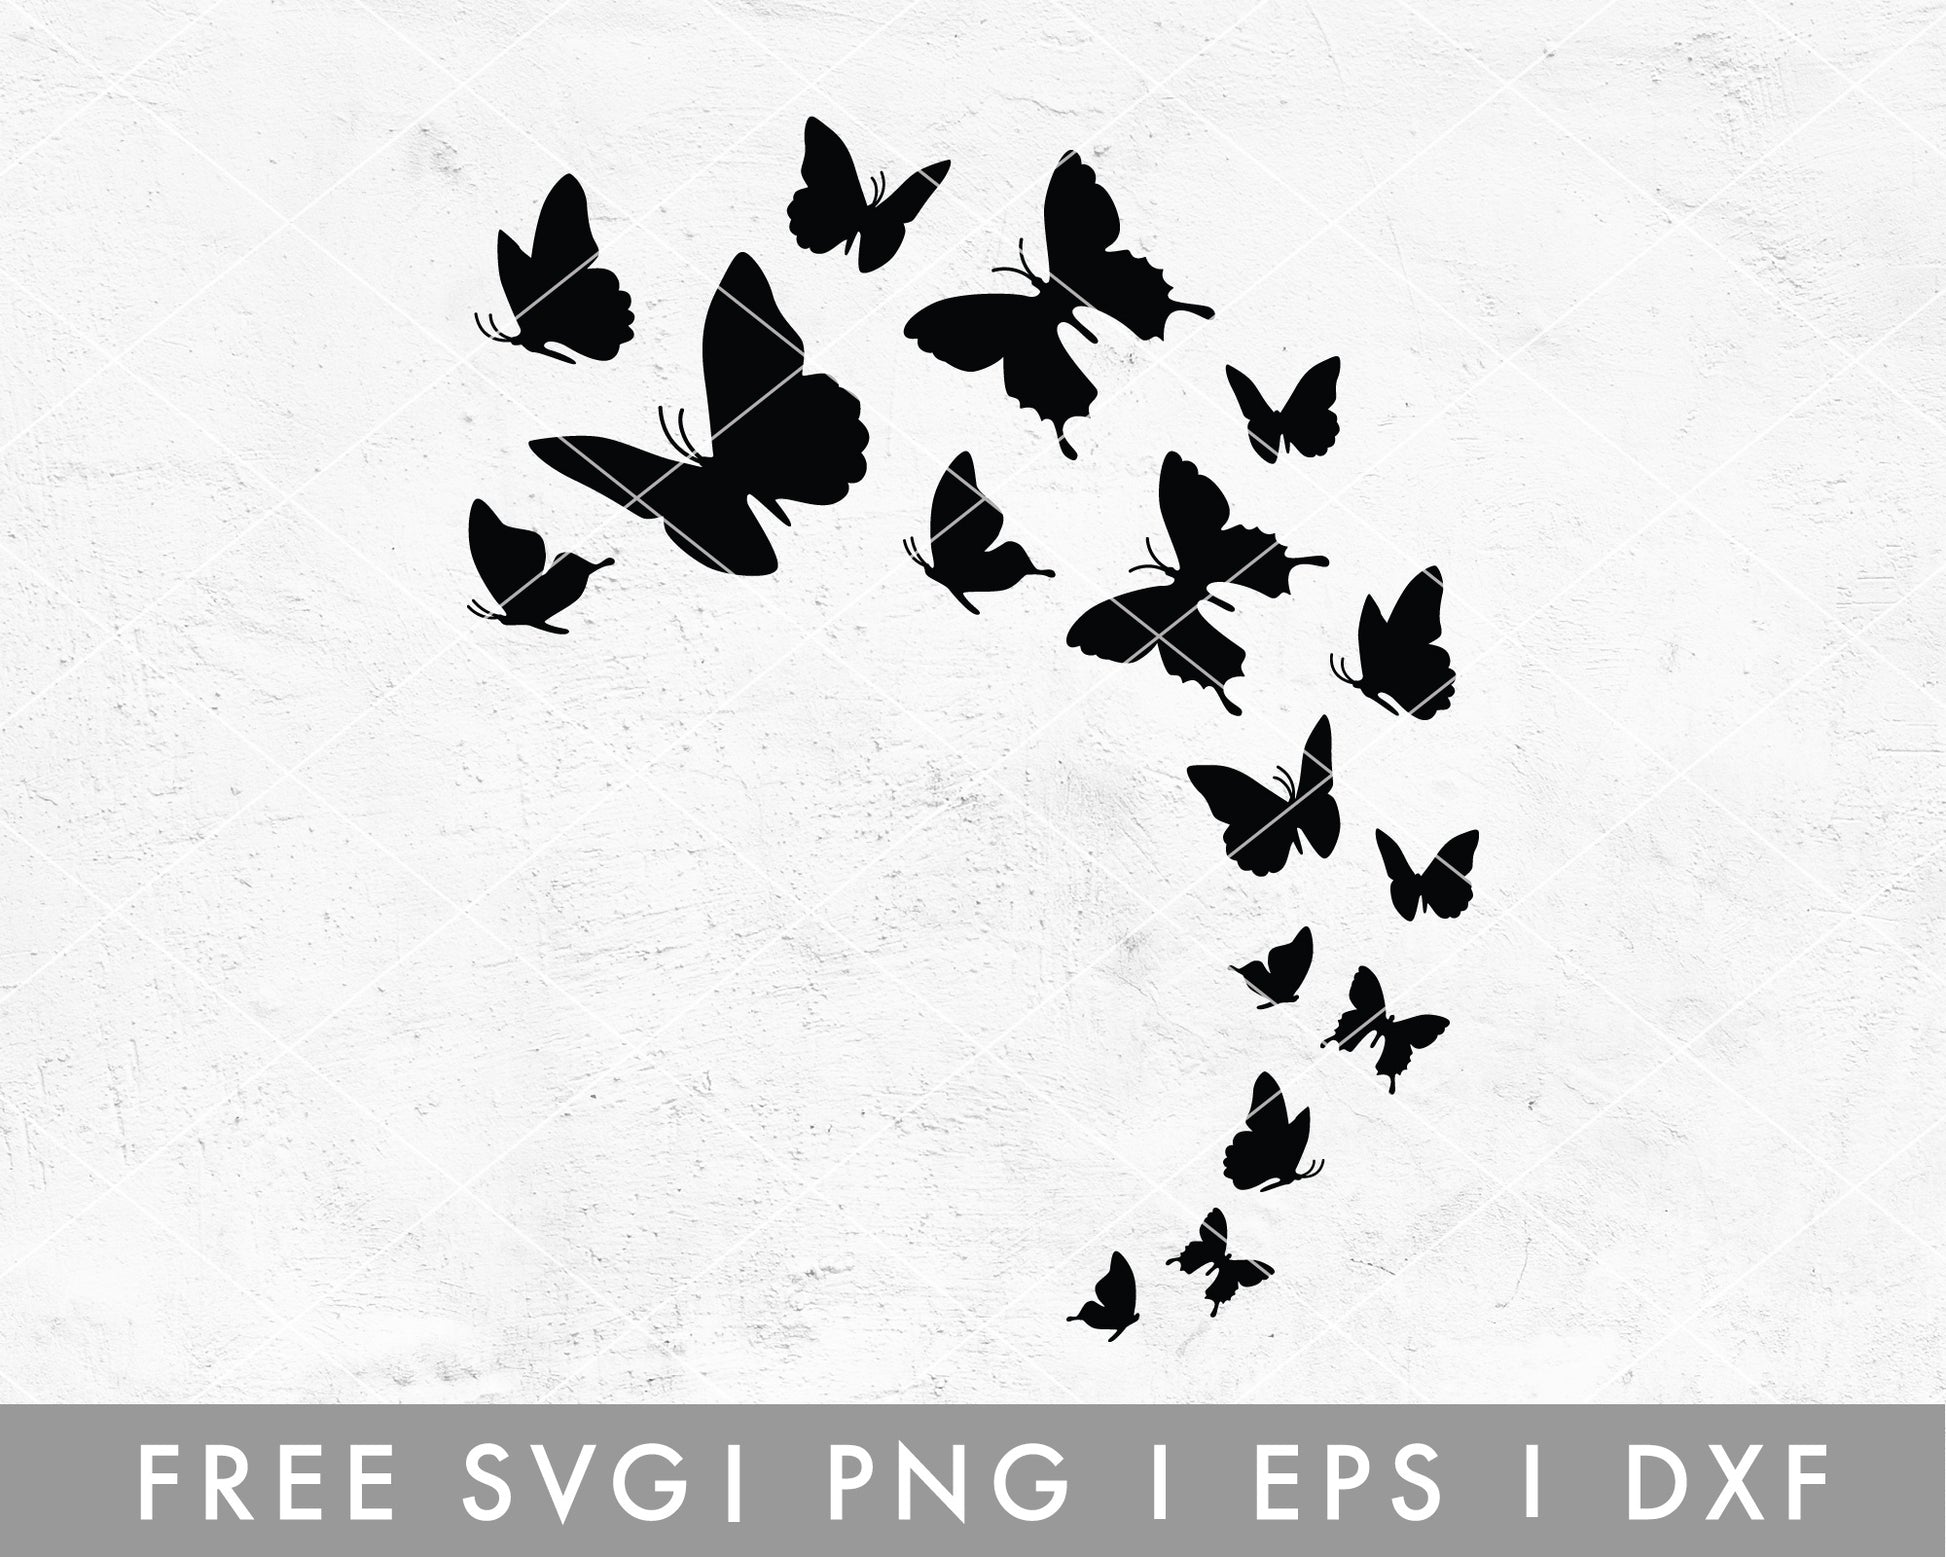 FREE Butterfly SVG | Flying SVG Cut File for Cricut, Cameo Silhouette | Free SVG Cut File